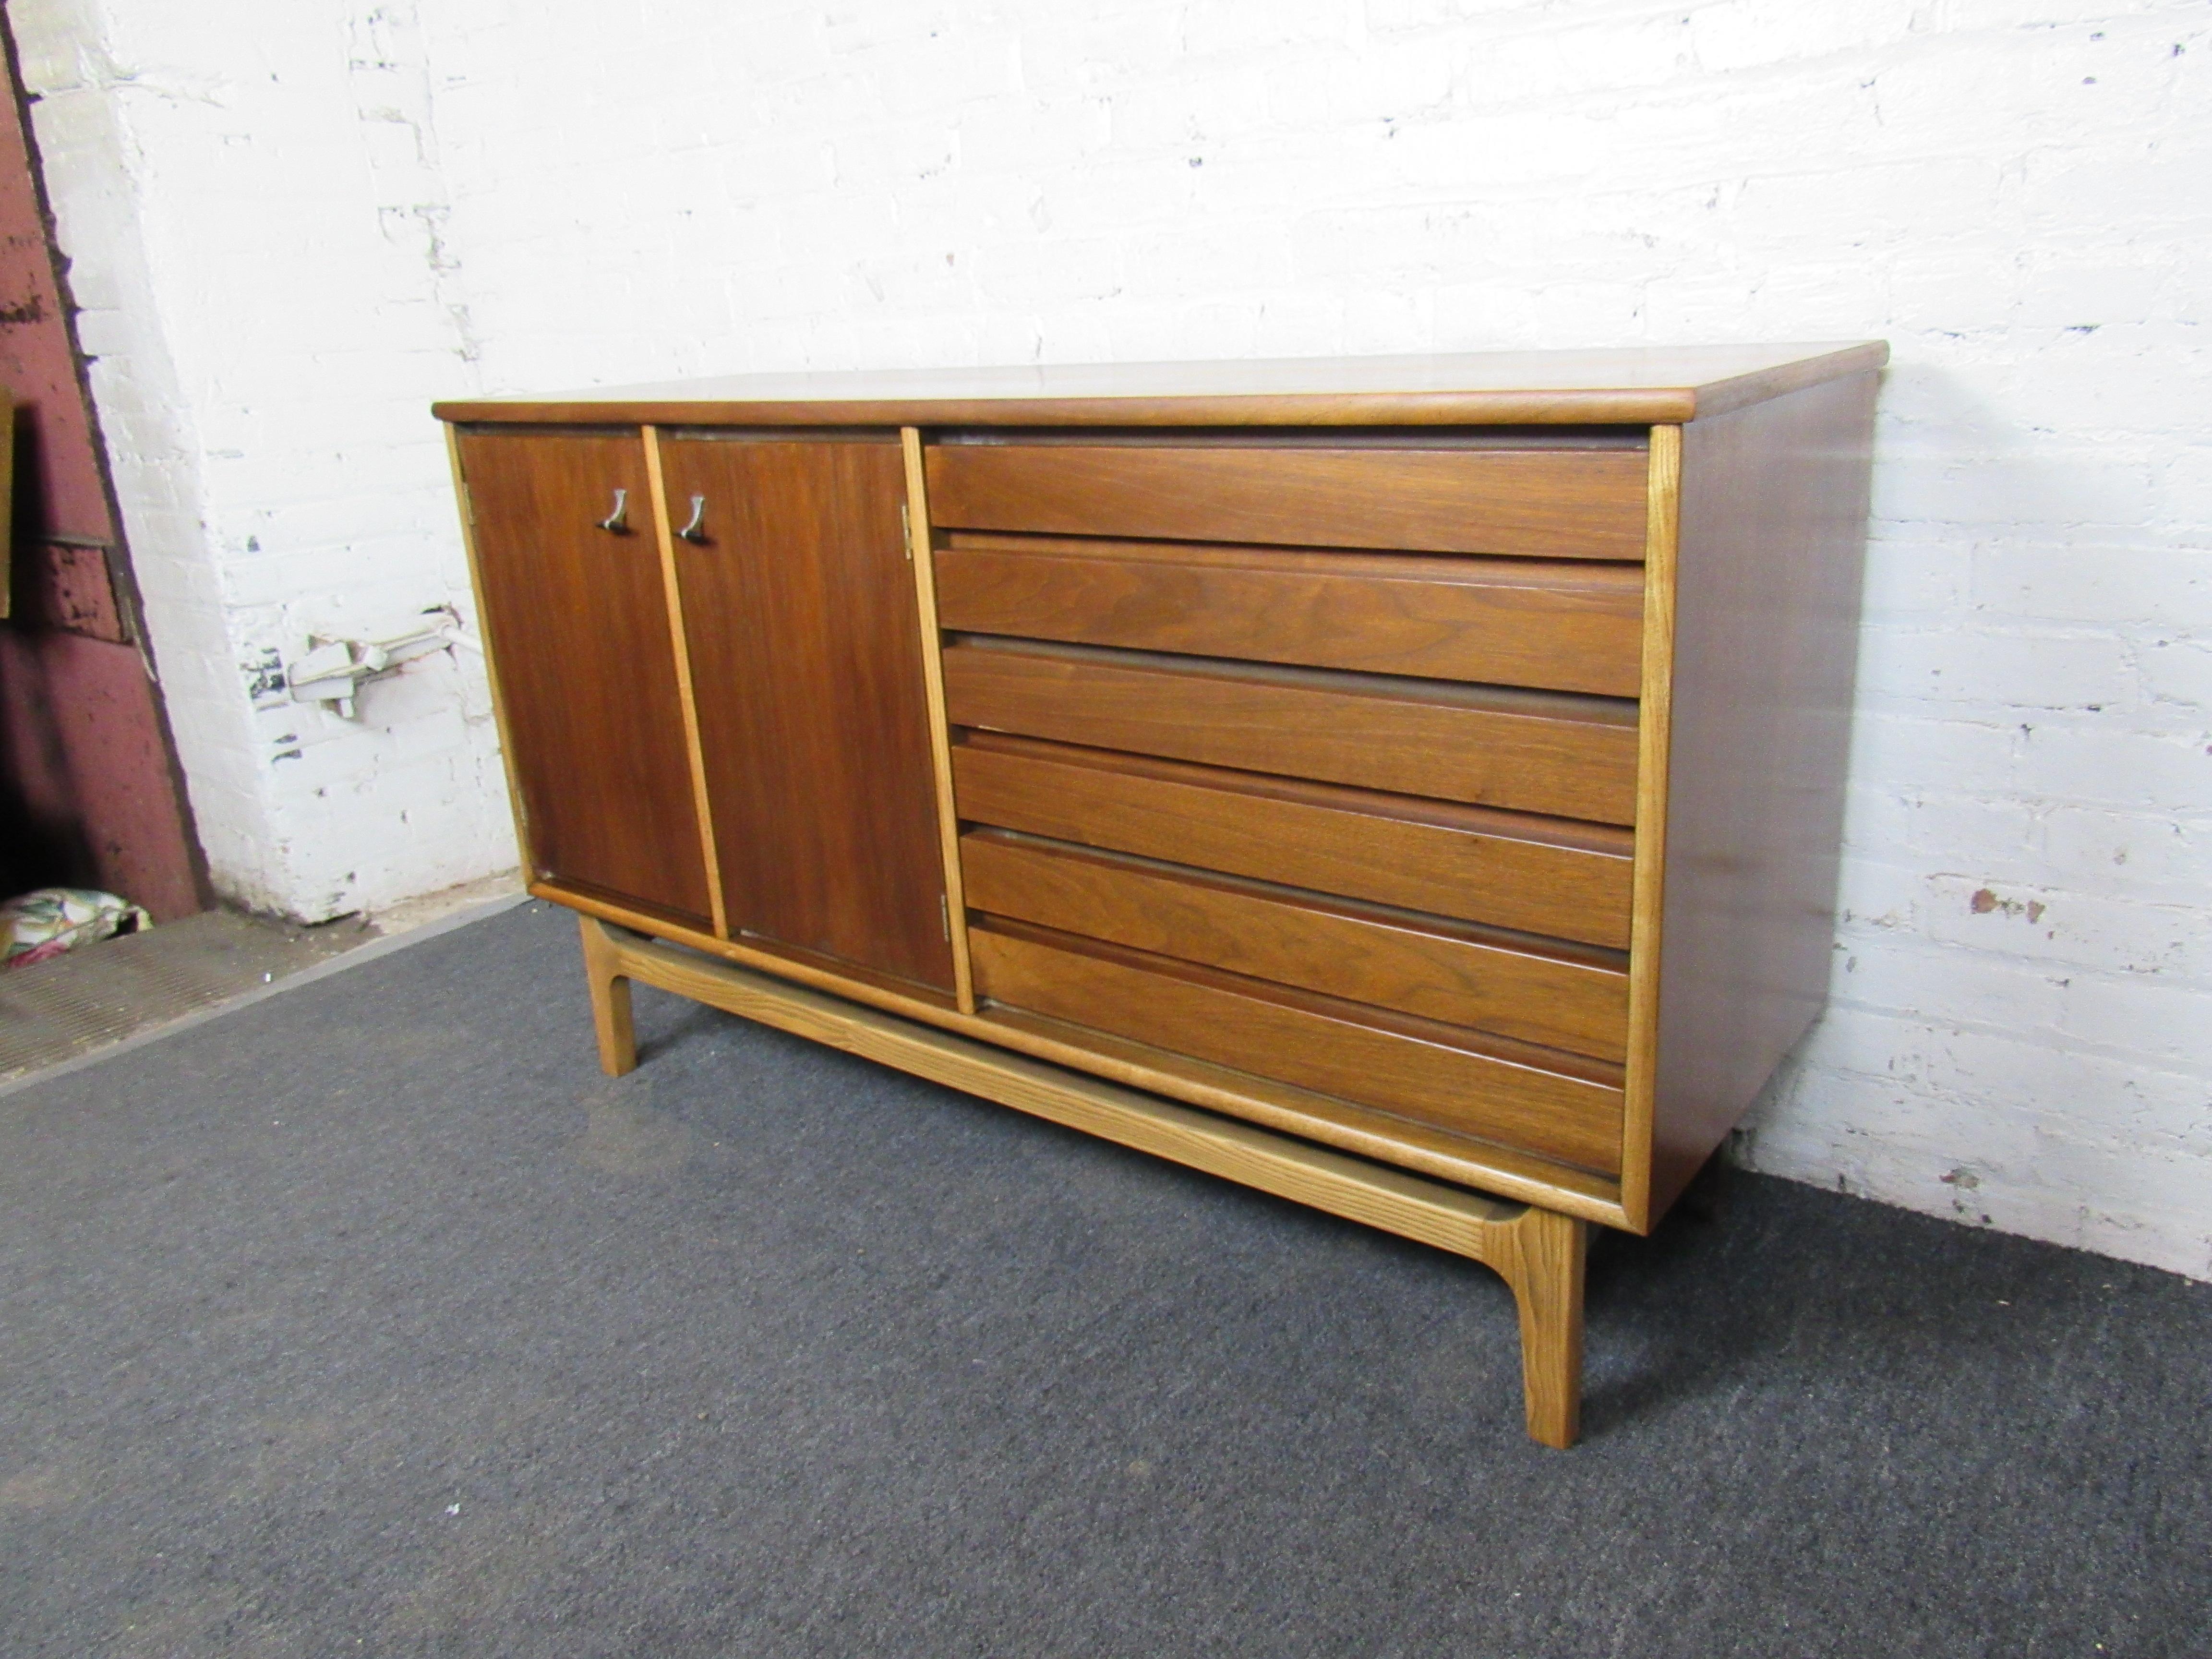 A gorgeous and understated vintage server displaying a rich walnut woodgrain and sculpted legs. With three drawers and storage compartments behind cabinet doors, this server offers plenty of storage space for its compact size. Please confirm item